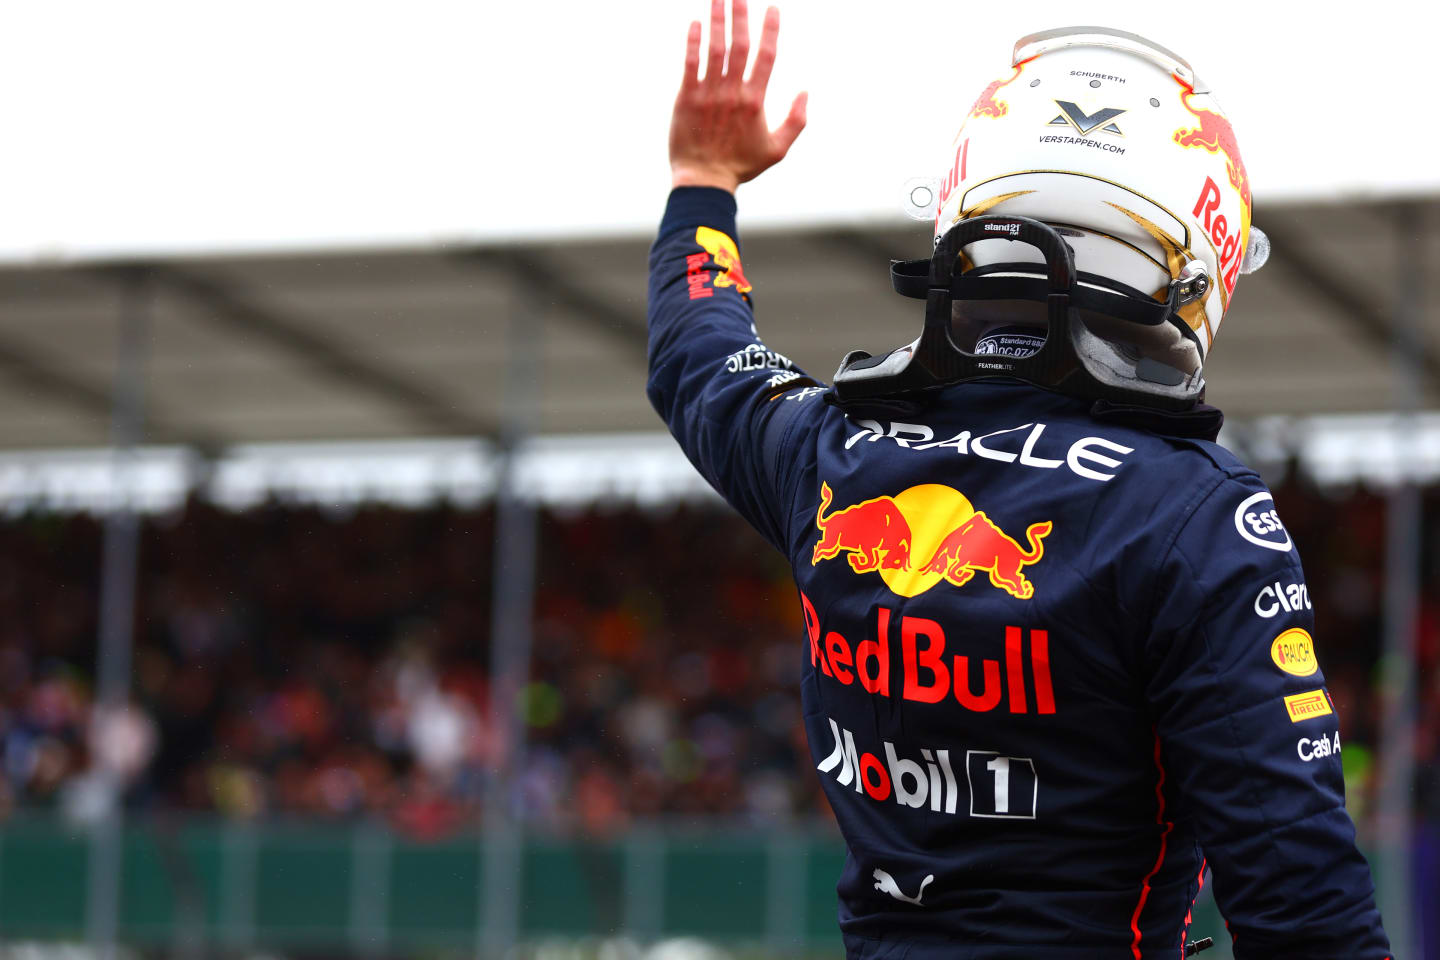 NORTHAMPTON, ENGLAND - JULY 02: Second placed qualifier Max Verstappen of the Netherlands and Oracle Red Bull Racing waves to the crowd in parc ferme during qualifying ahead of the F1 Grand Prix of Great Britain at Silverstone on July 02, 2022 in Northampton, England. (Photo by Mark Thompson/Getty Images)